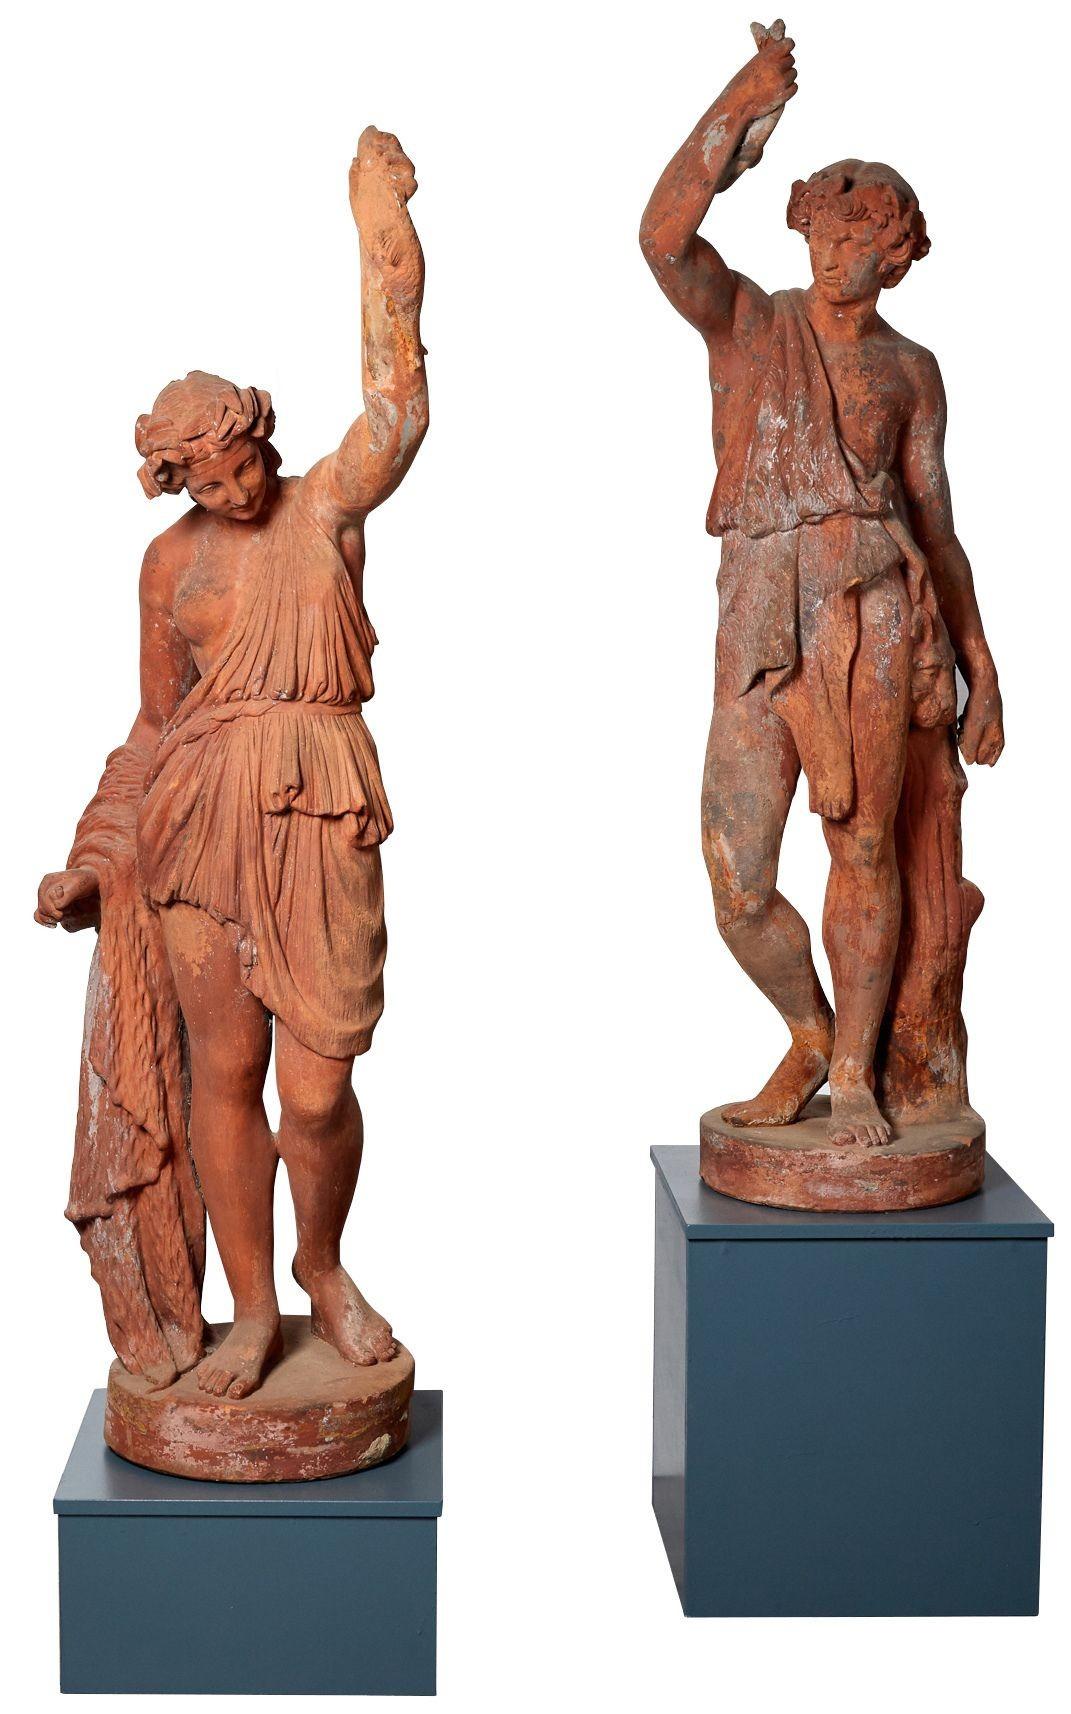 Pair of Antique Terracotta Figures by John Matthews. A pair of Terracotta models of Bacchantes sculpted by John Matthews. Both statues are situated on integral circular socles impressed with the maker’s mark: JOHN MATTHEWS ROYAL POTTERY WESTON SUPER